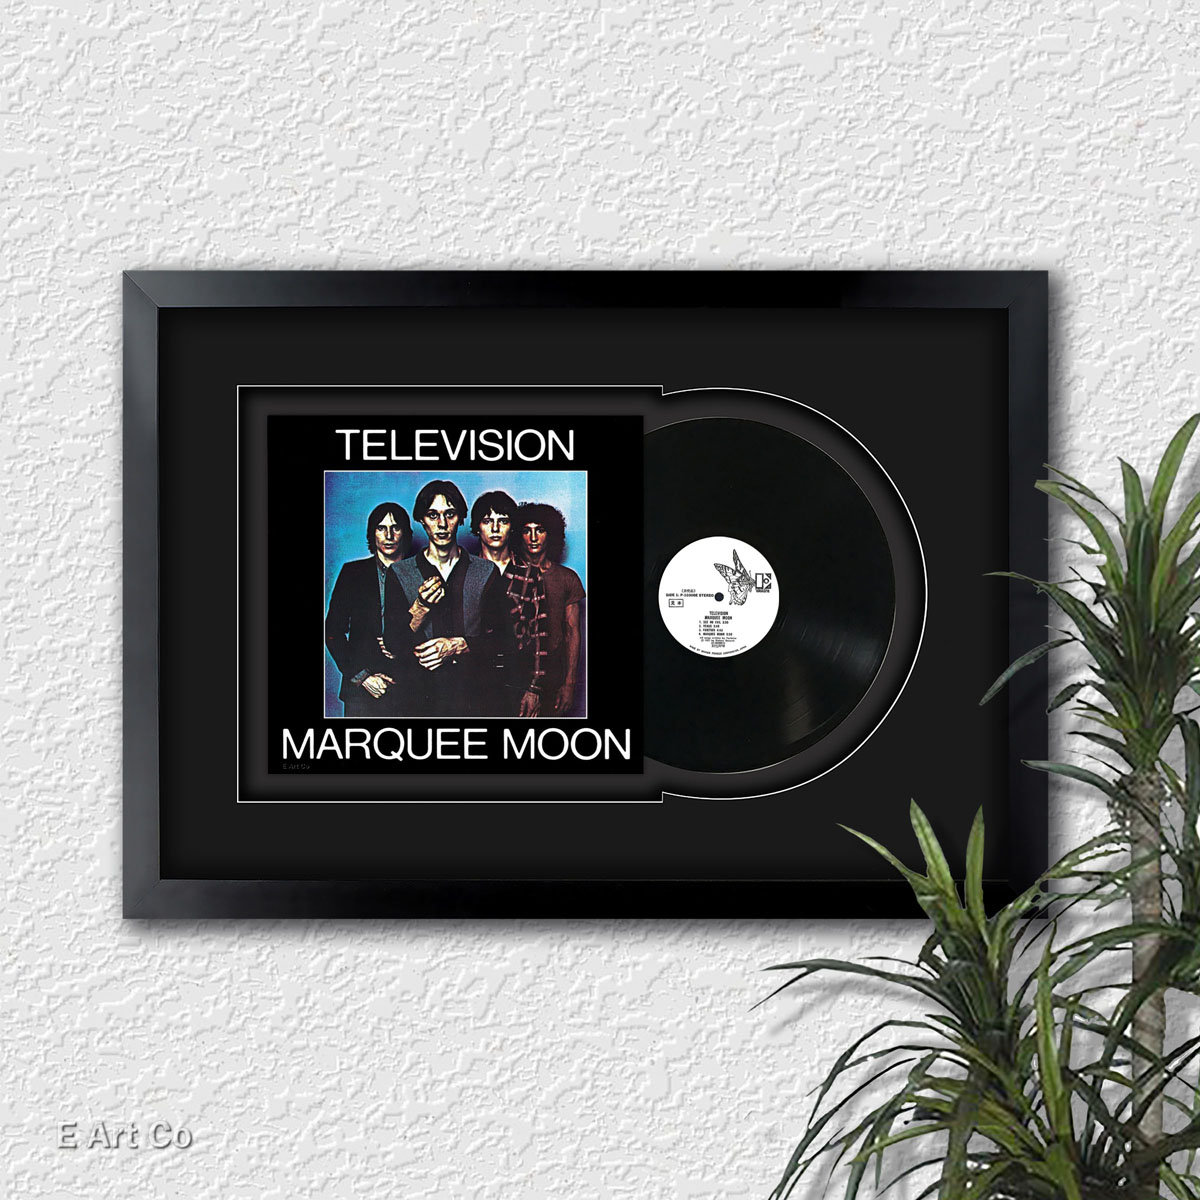 Marquee Moon by Television , Vinyl LP Record Framed and Ready to Hang,  Music Gift,display, Wall Art 